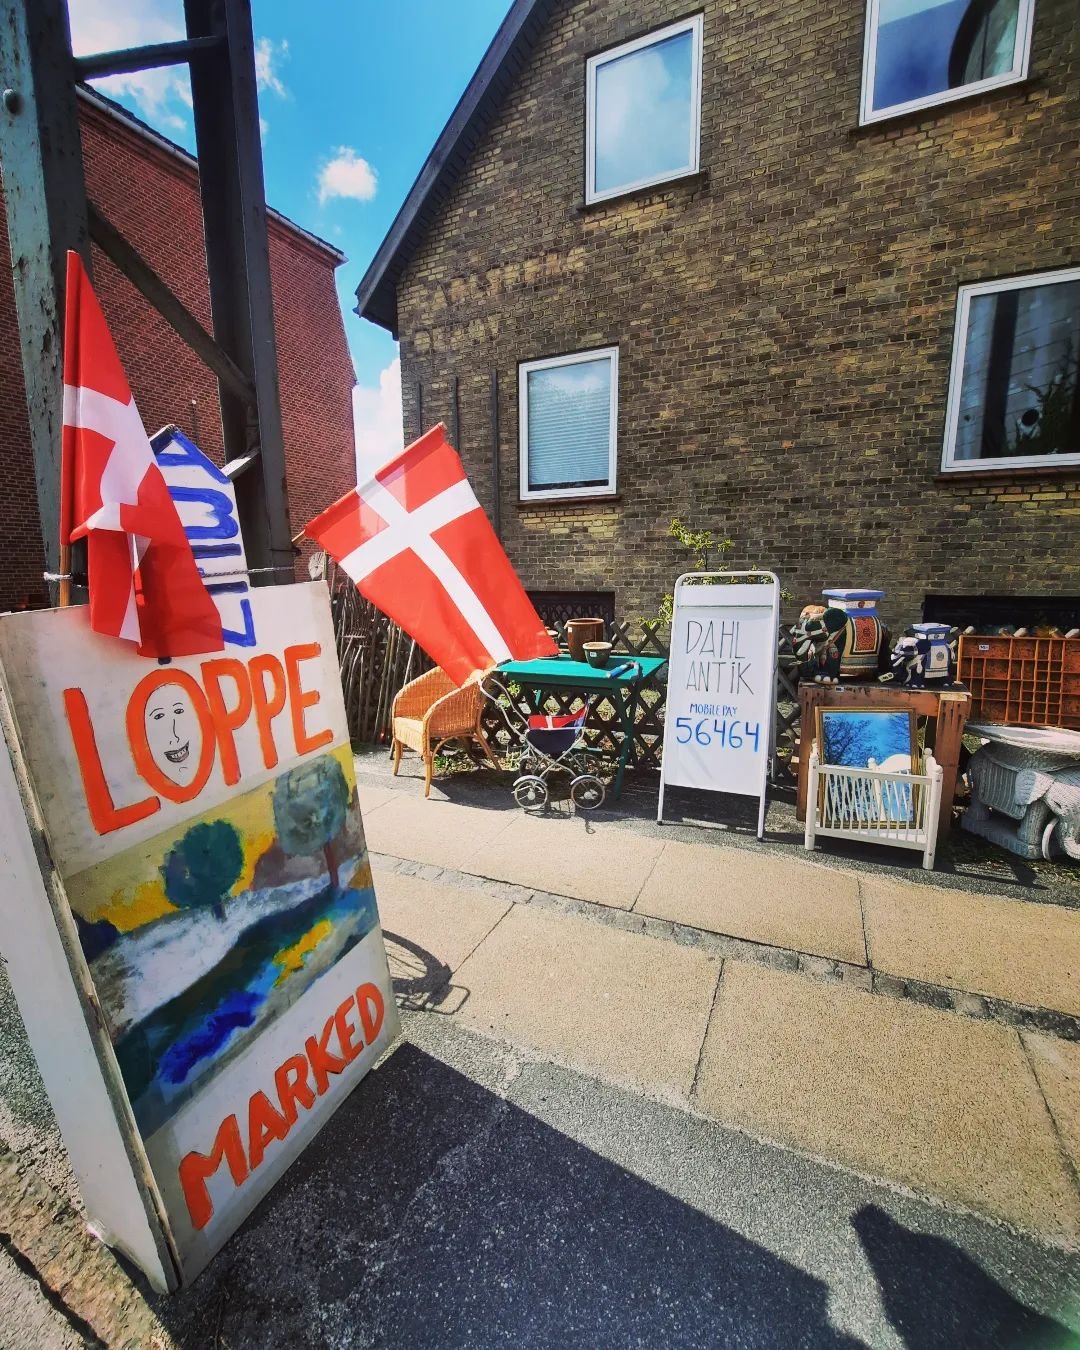 'Loppe' seasons is upon us.

When the days get lighter, the skies bluer, the temperatures (kind of) get warmer and locals start putting their used goods on the street for you to buy or take take 'gratis' (free) at mini loppemarked.  Like the one we o